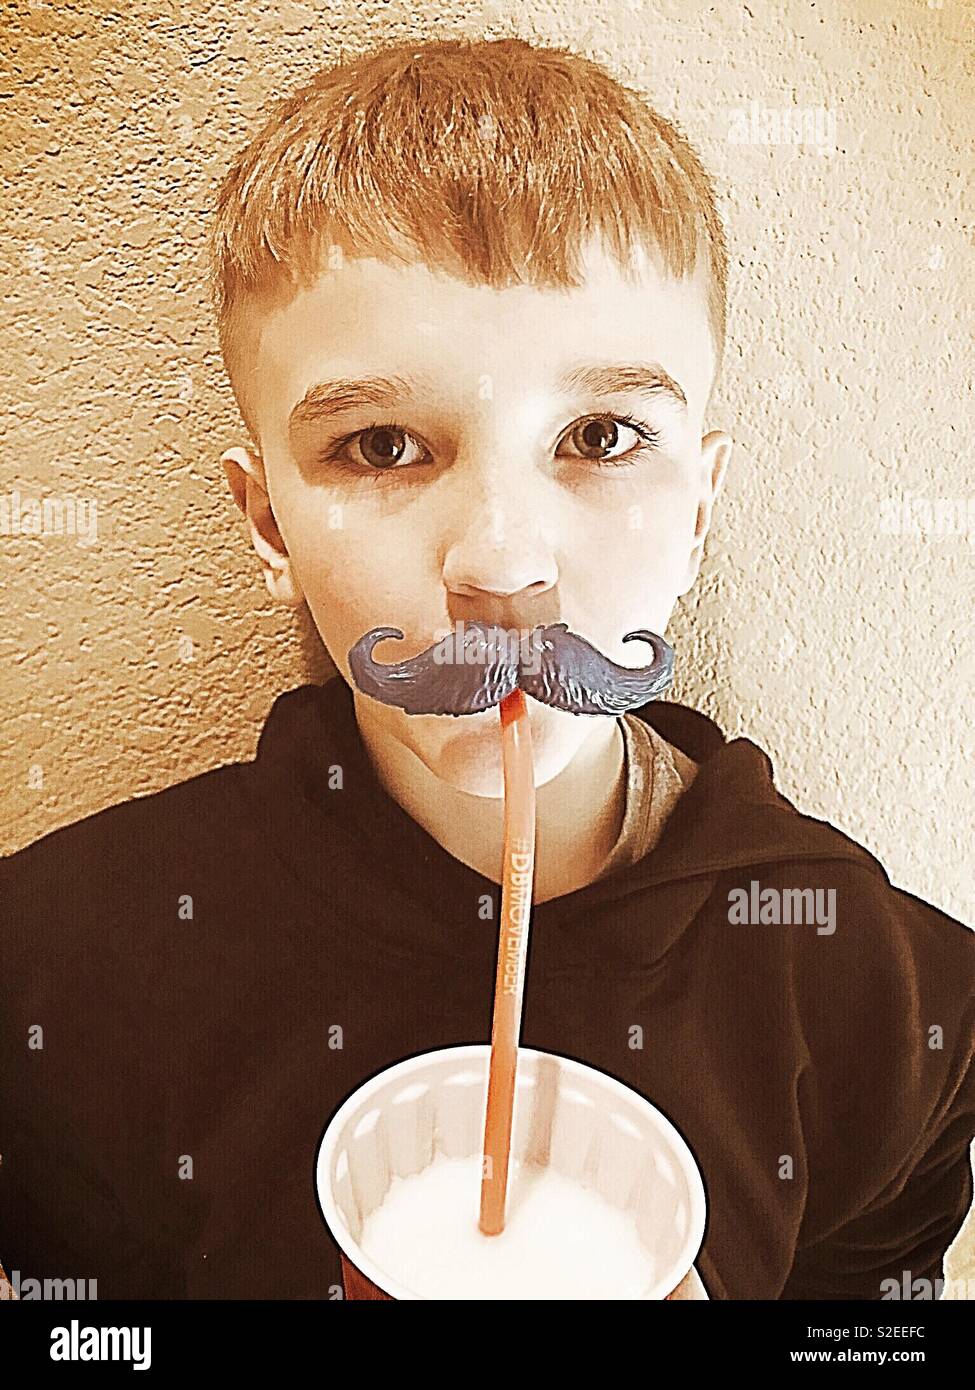 A young boy drinking milk with a funny mustache straw. Funny kids. Stock Photo